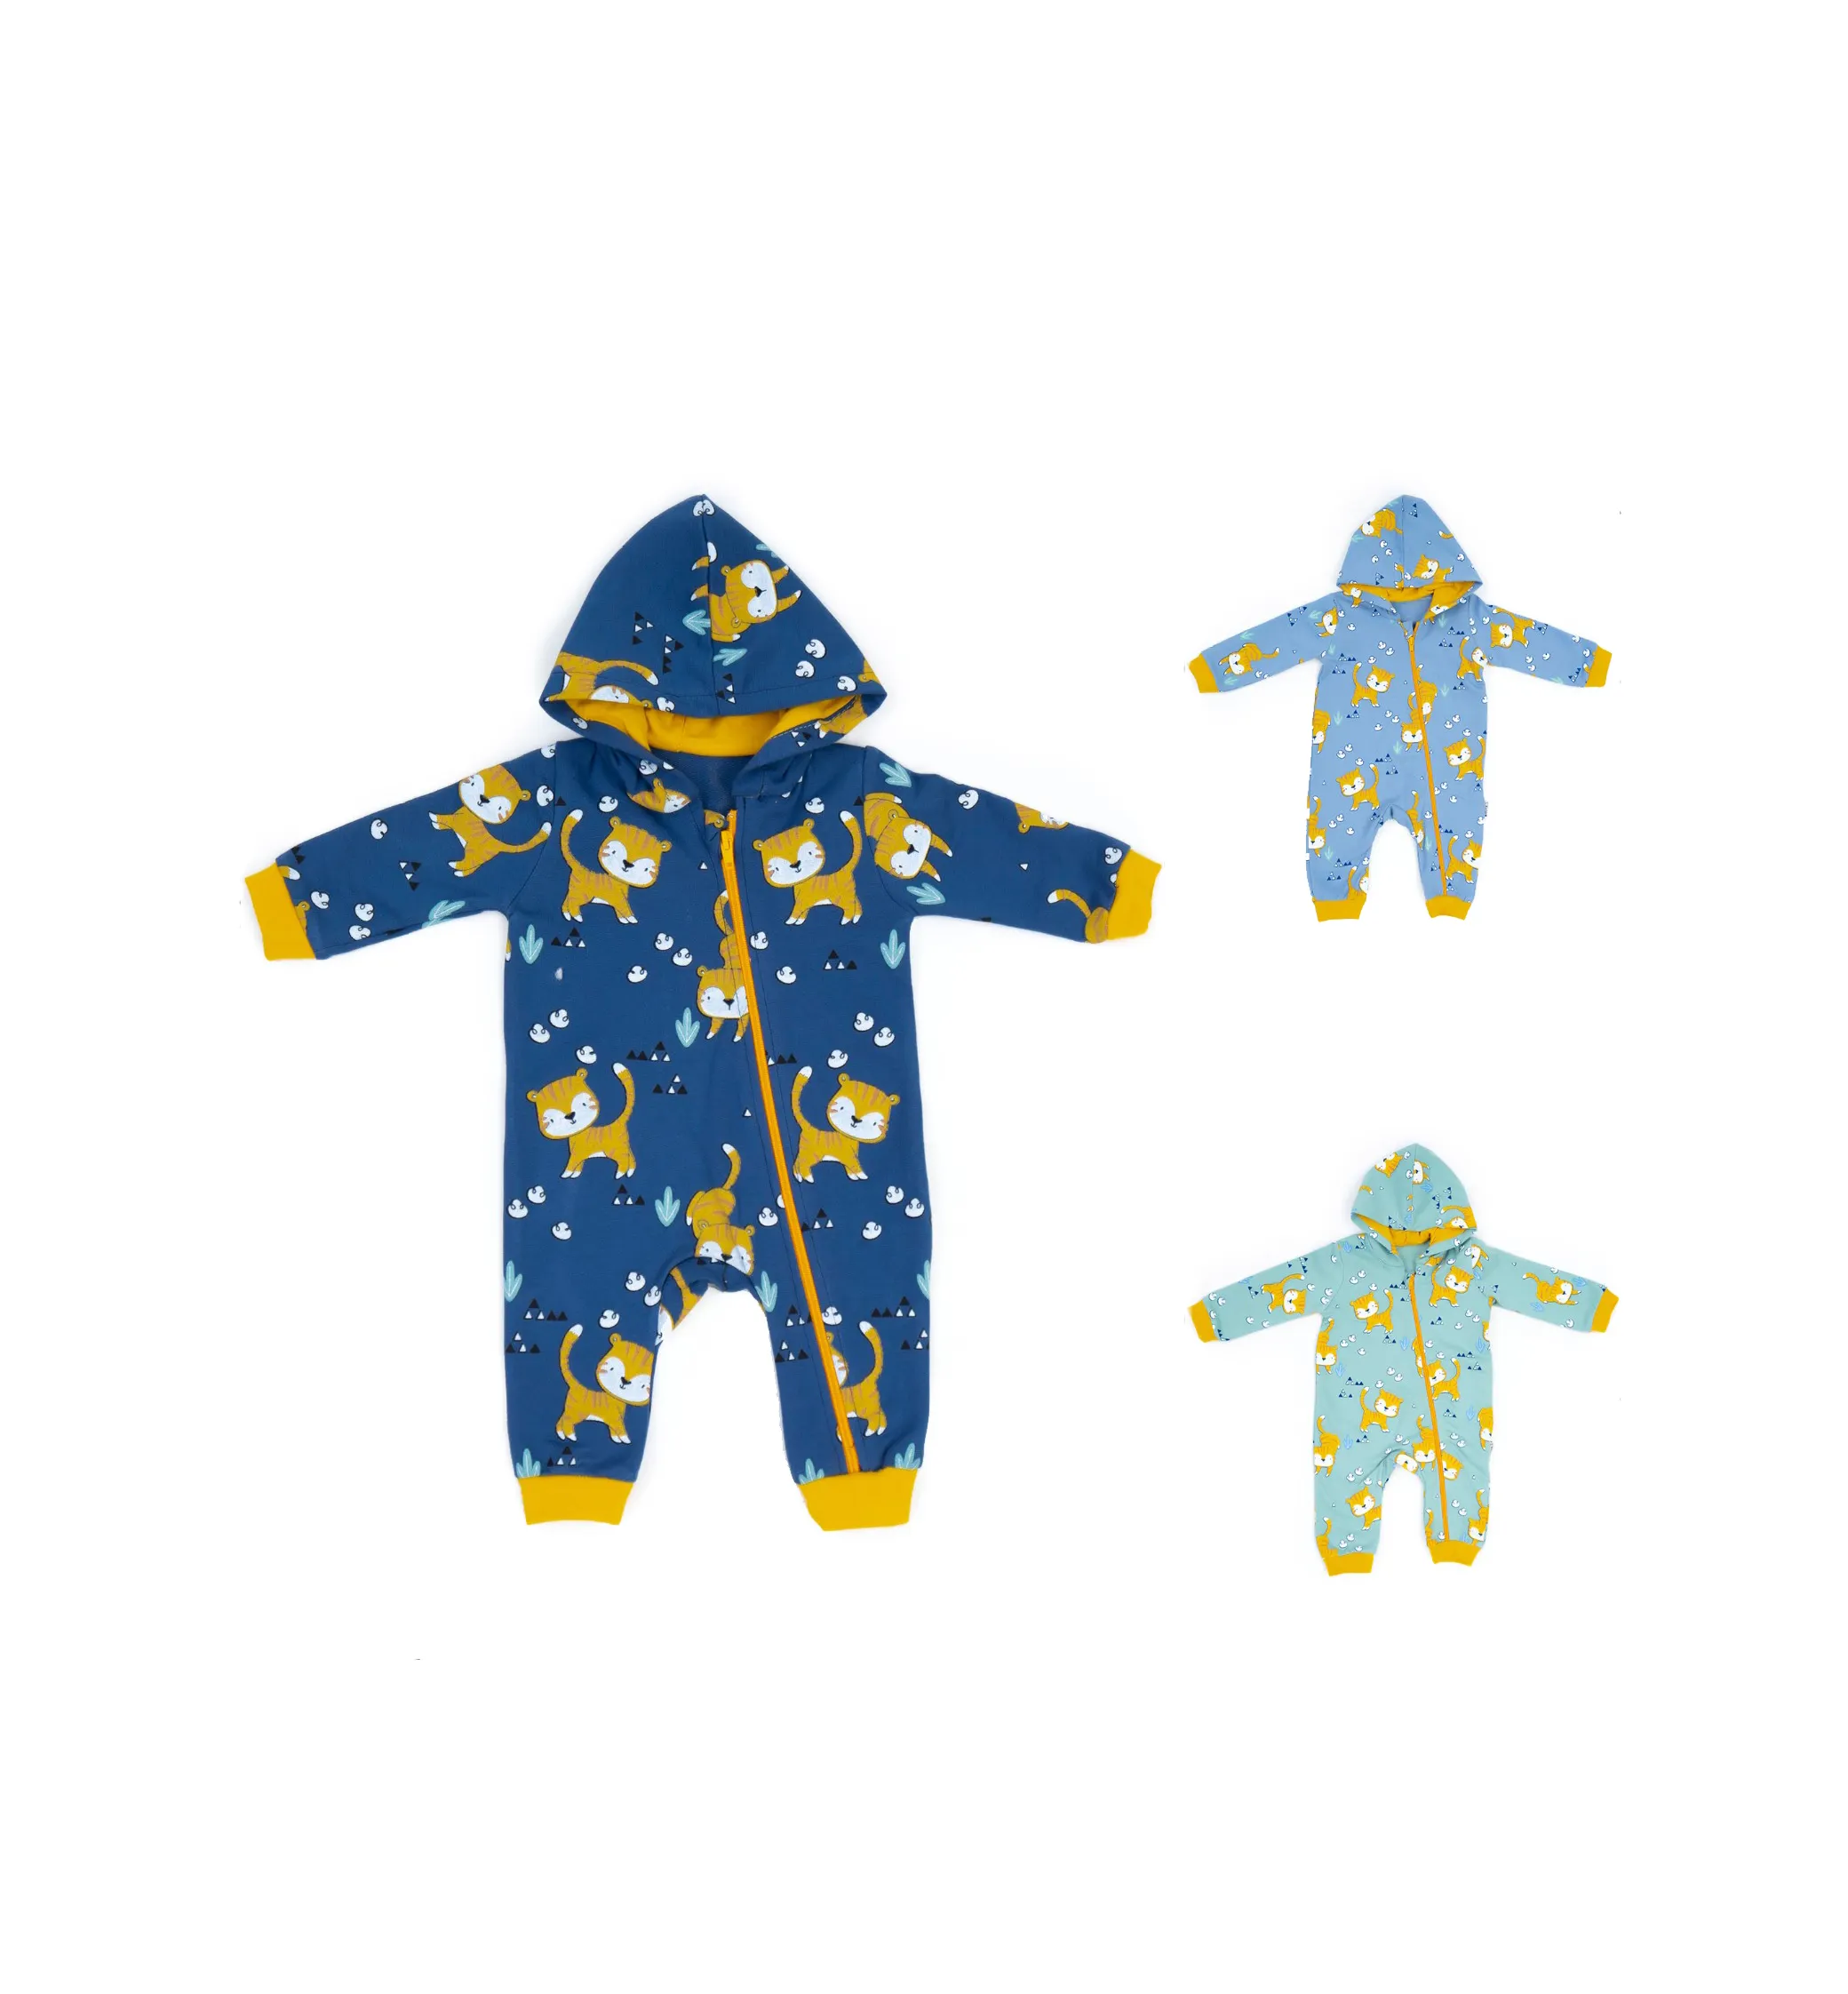 Hot Sale ! Meow Zippered Hoodie Baby Boys Rompers Spring Soft Cotton Baby Clothes By Necix's Brand